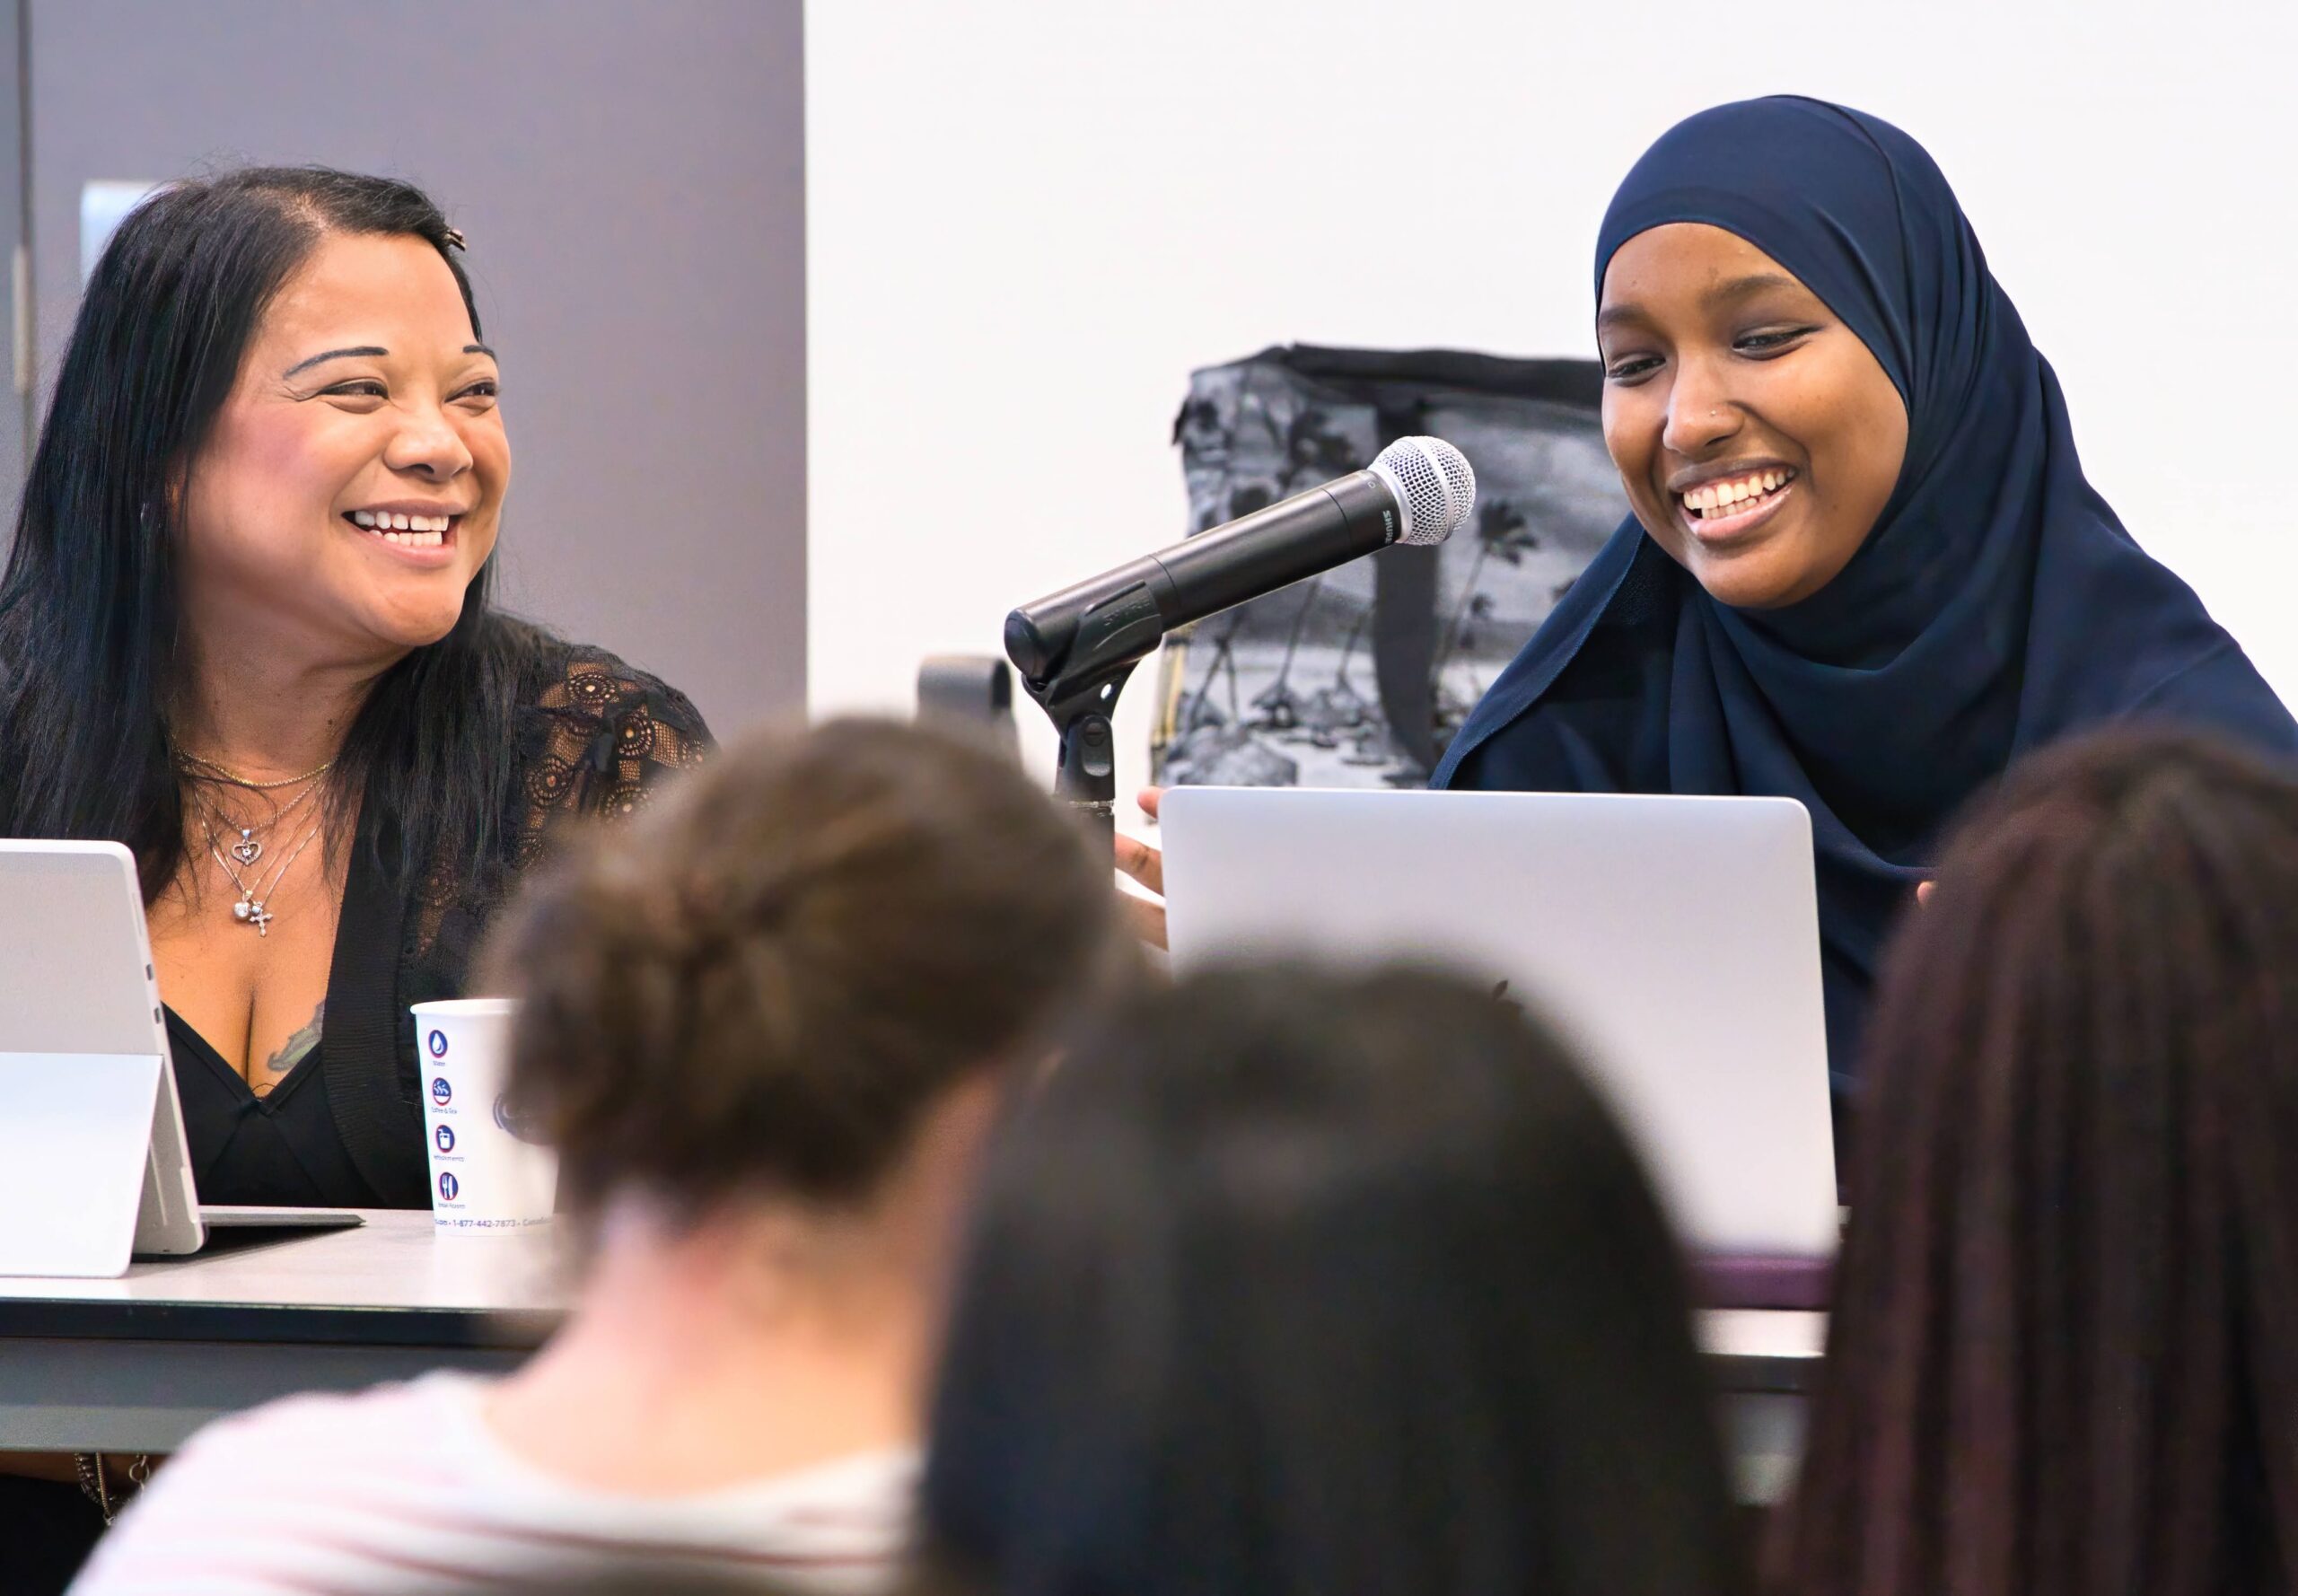 Photo from the Day in the Life of a Social Worker event featuring two panelists, seated and smiling